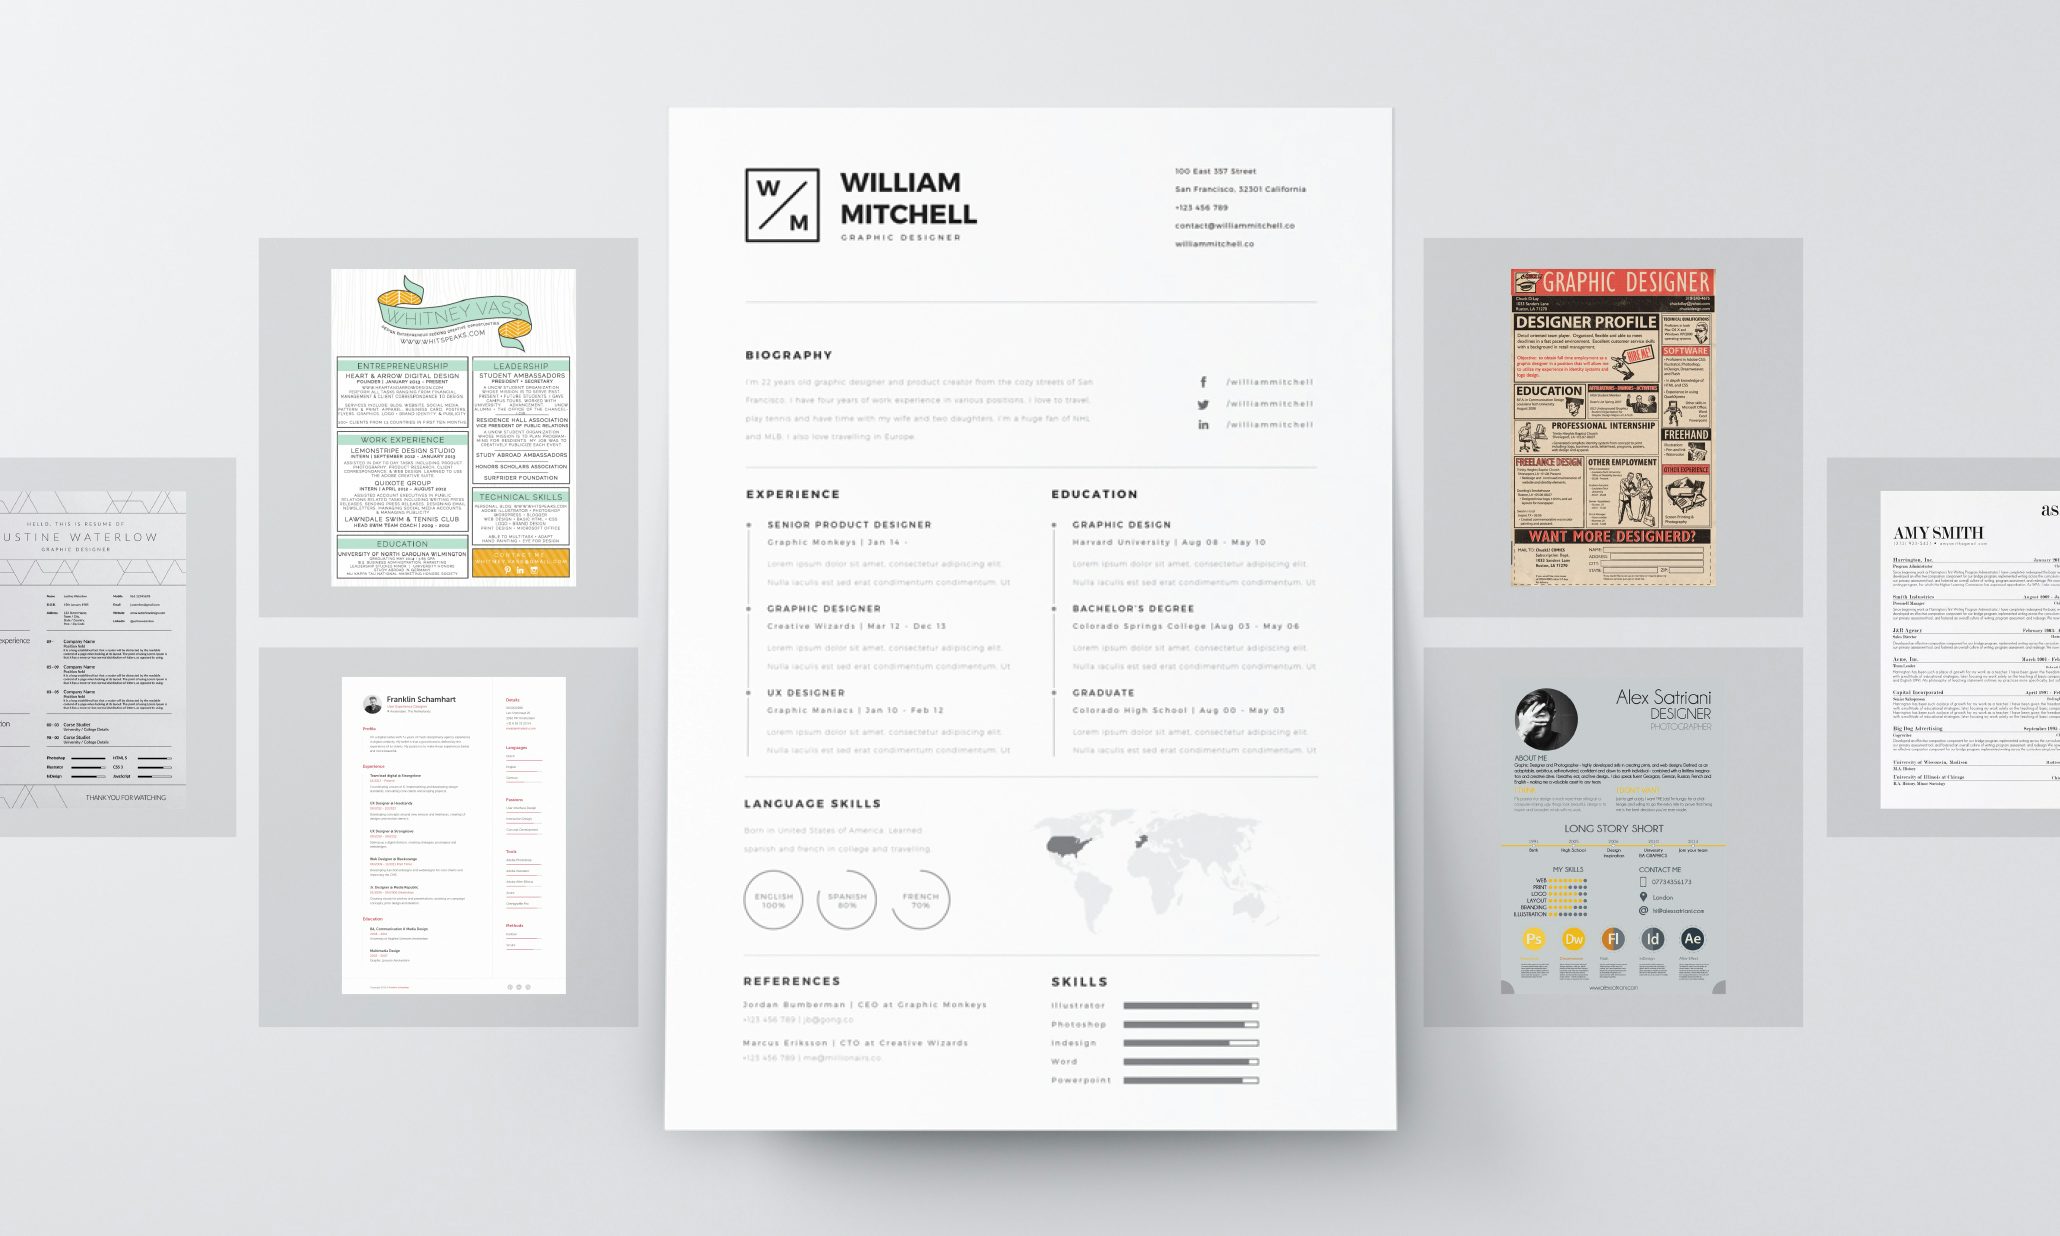 7 Resume Design Principles That Will Get You Hired 99designs - 